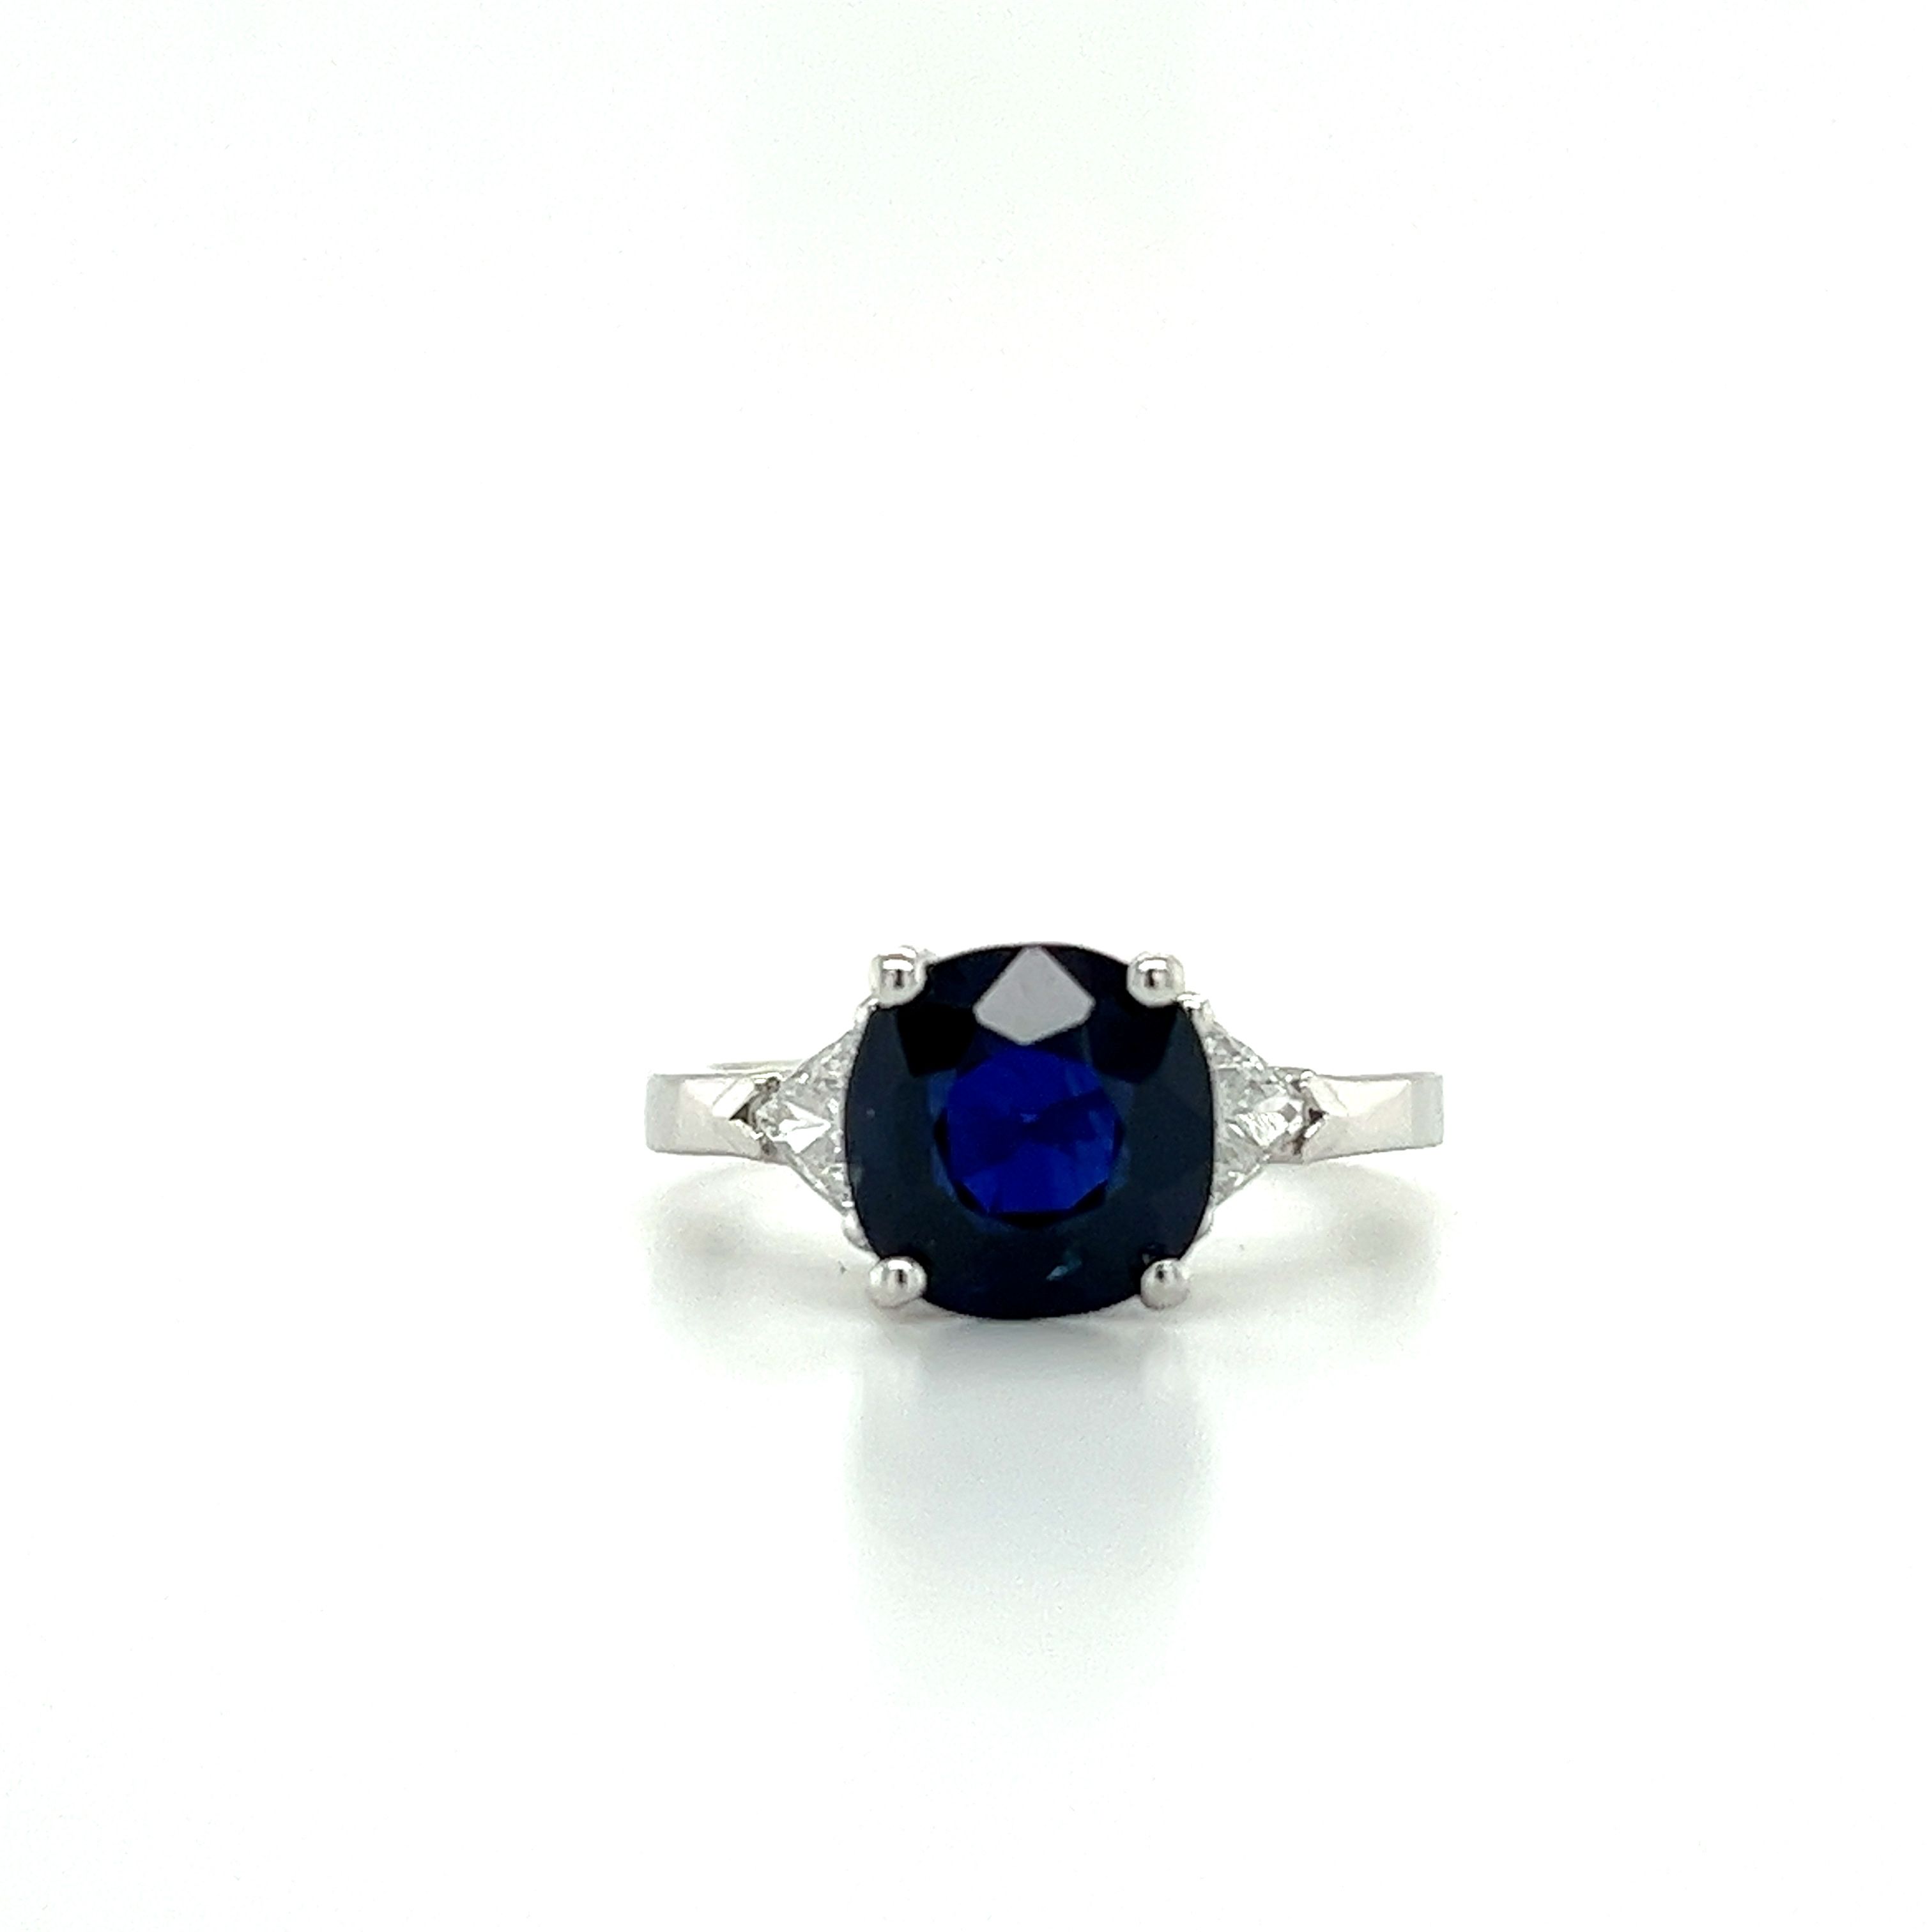 Simplicity and elegance are on full display with this GIA certified 2.63-carat natural Blue Sapphire ring with 2 trillion cut diamond side stones and in 18 karat white gold setting. The Sapphire bears a deep dark blue color saturation with excellent